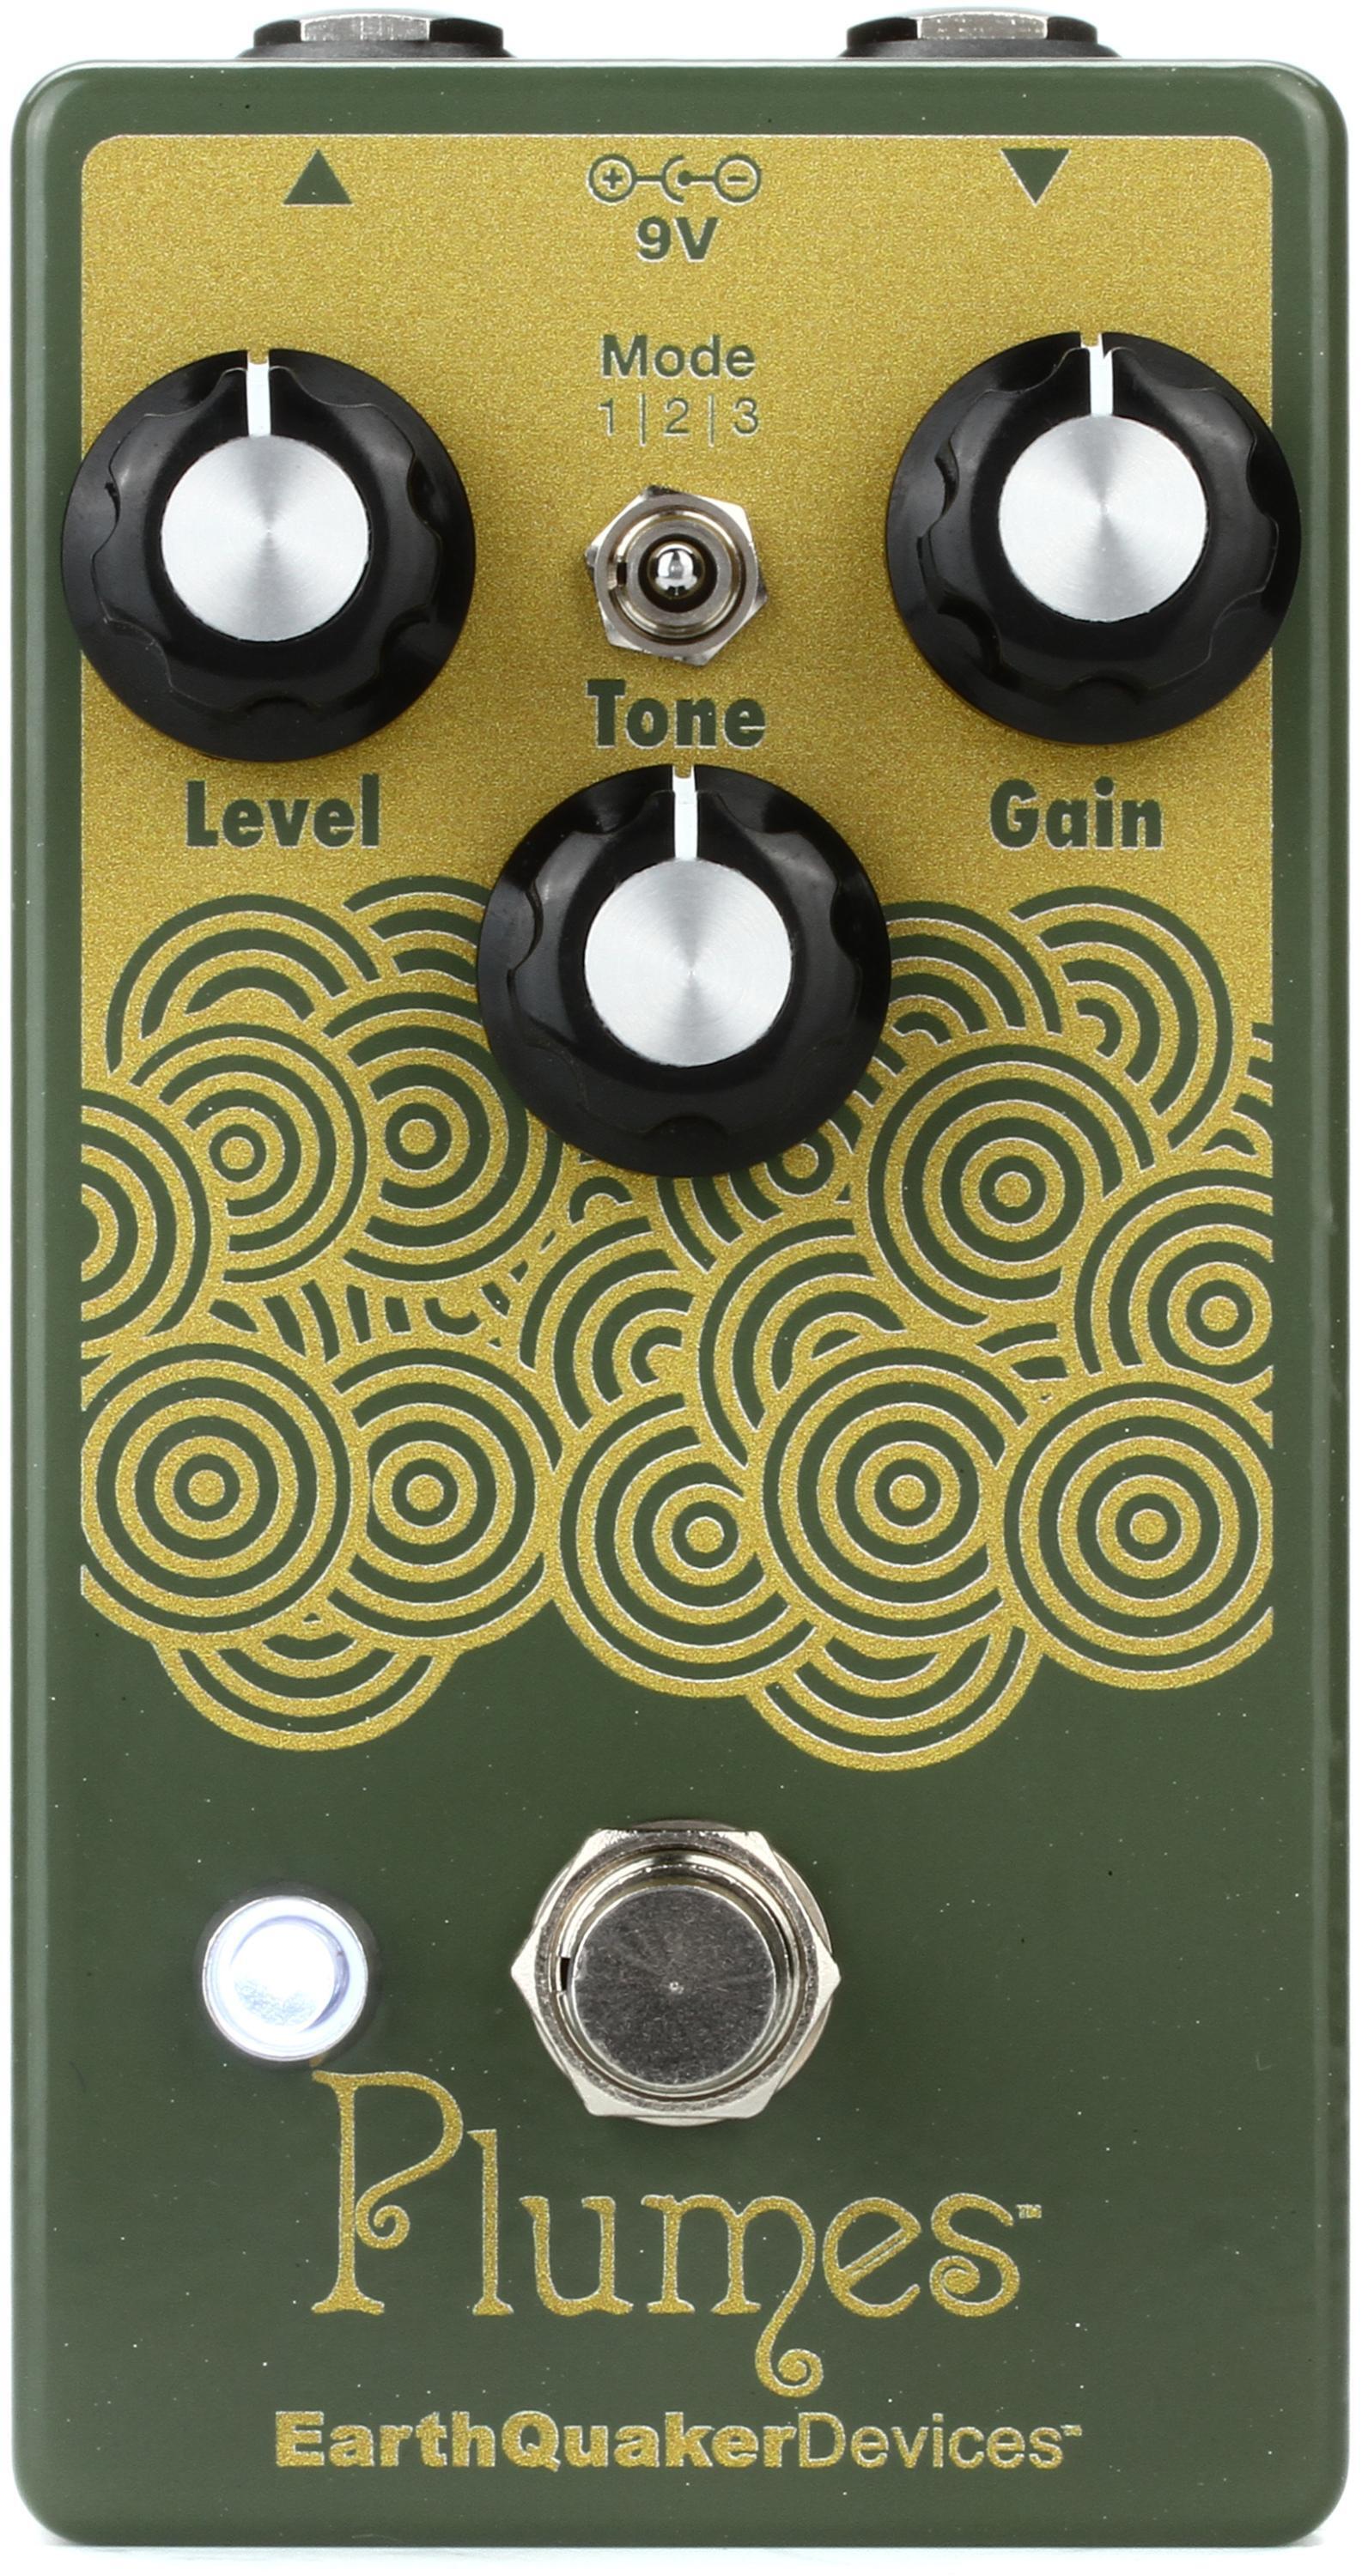 Bundled Item: EarthQuaker Devices Plumes Small Signal Shredder Overdrive Pedal